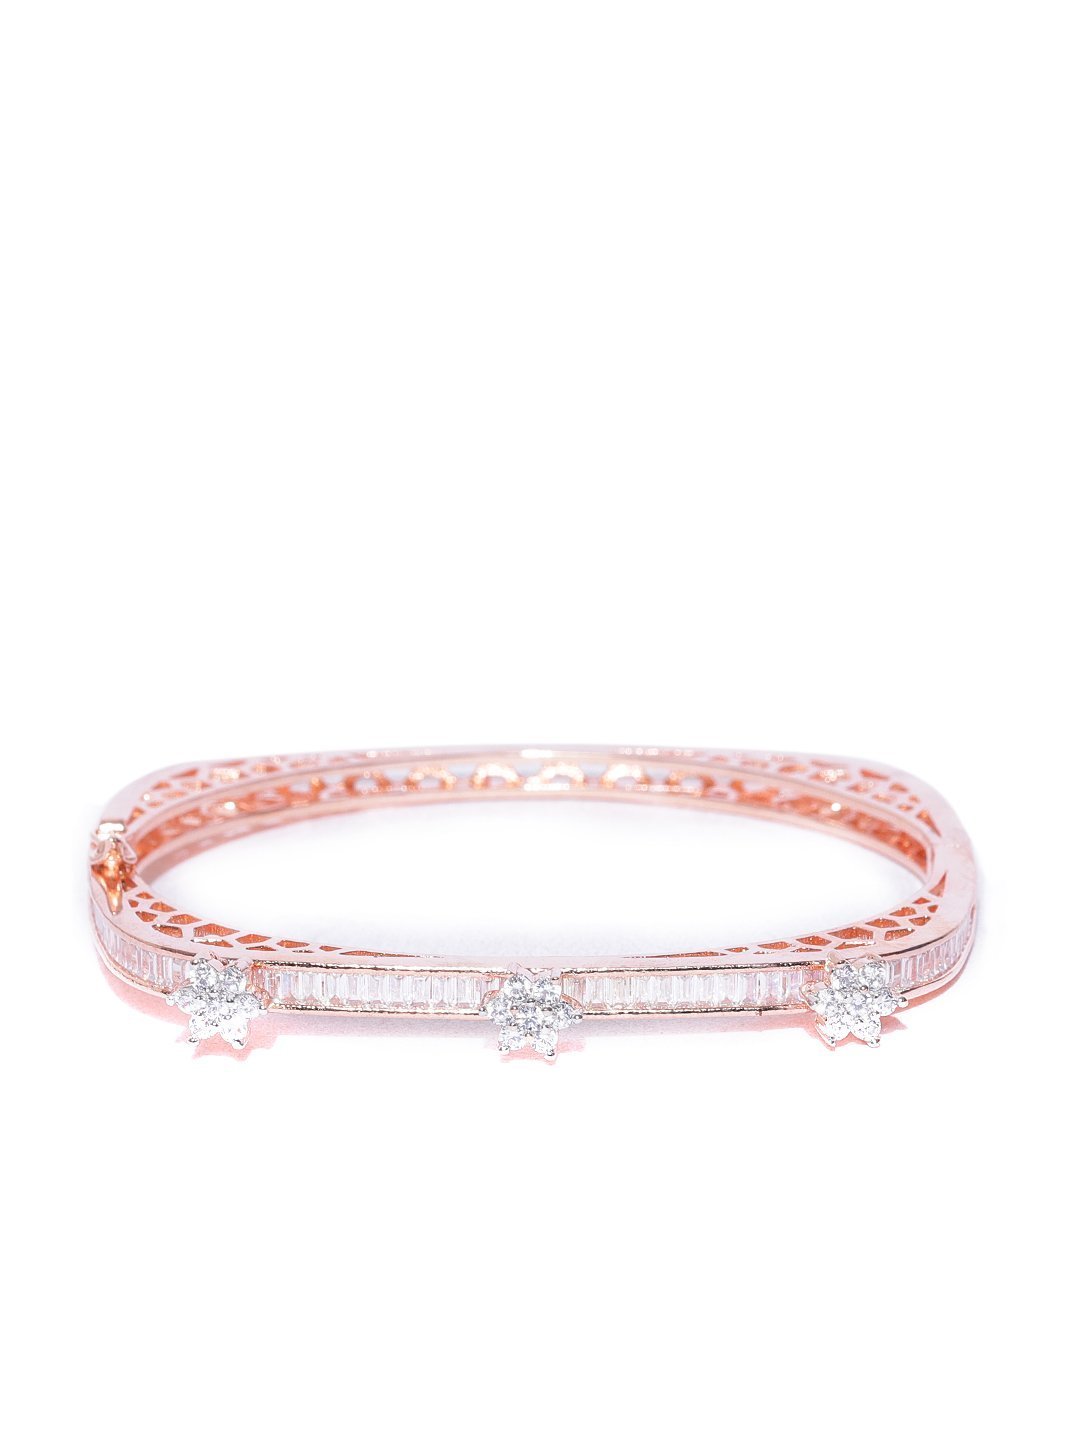 Women's Rose Gold-Plated American Diamond Studded, Floral Patterned Bracelet in Square Shape - Priyaasi